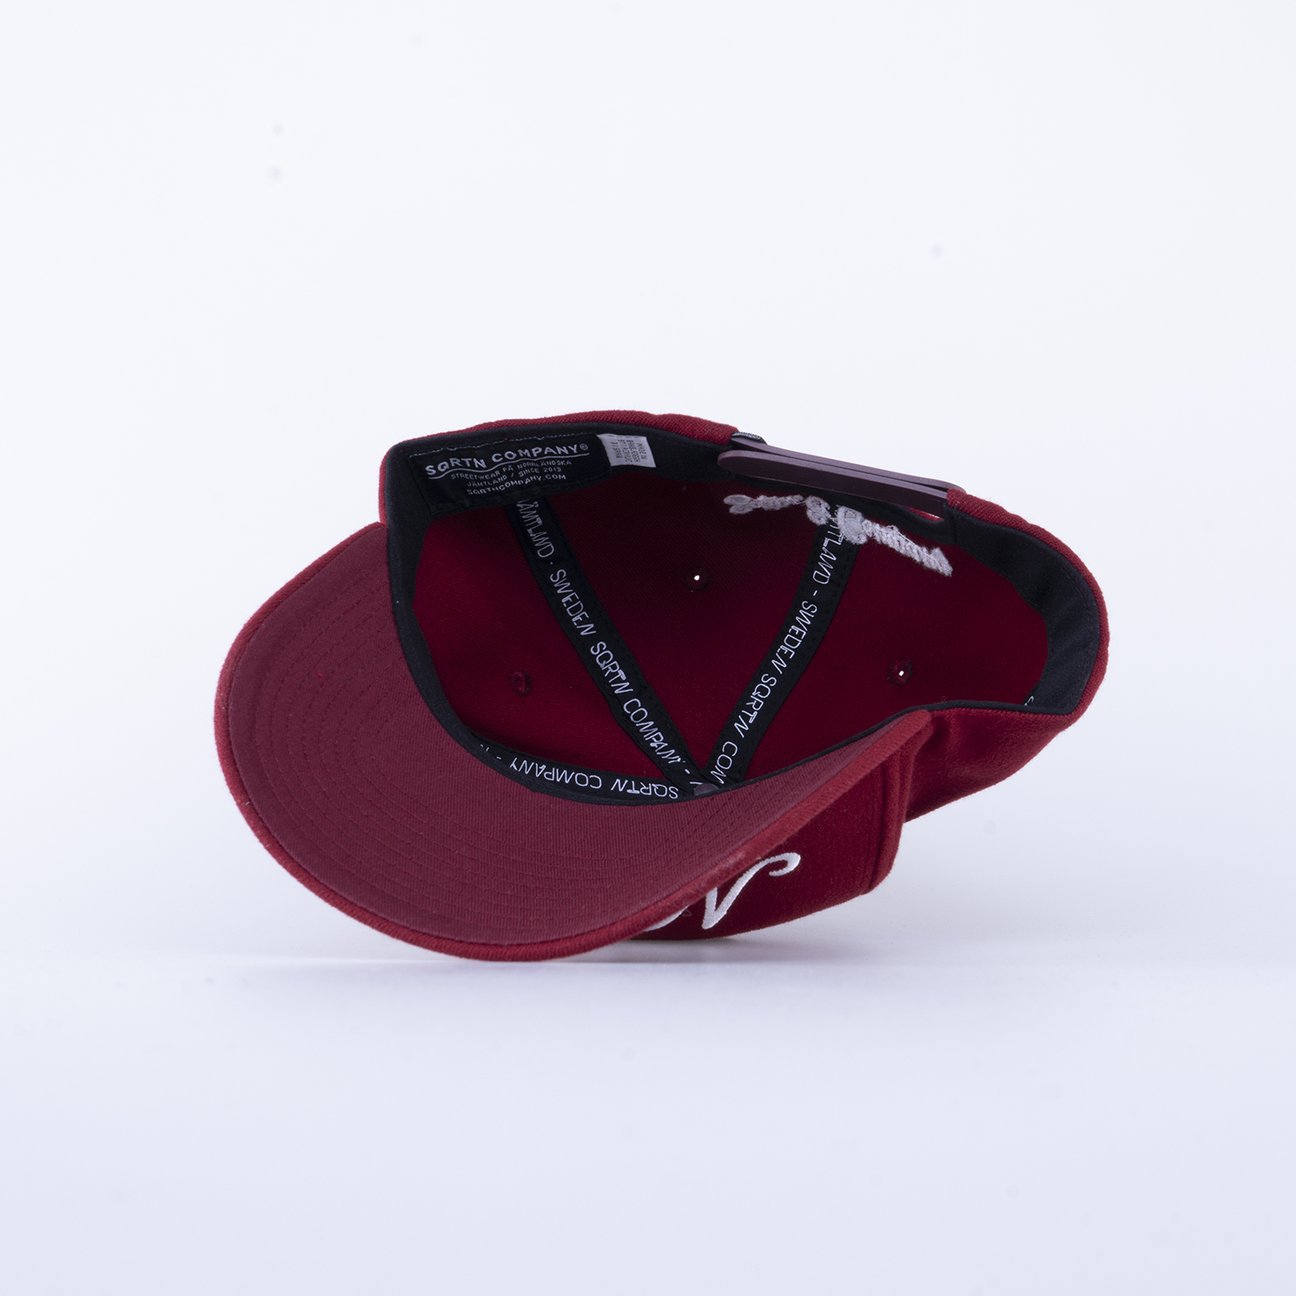 GREAT NORRLAND 120 KEPS - MAROON